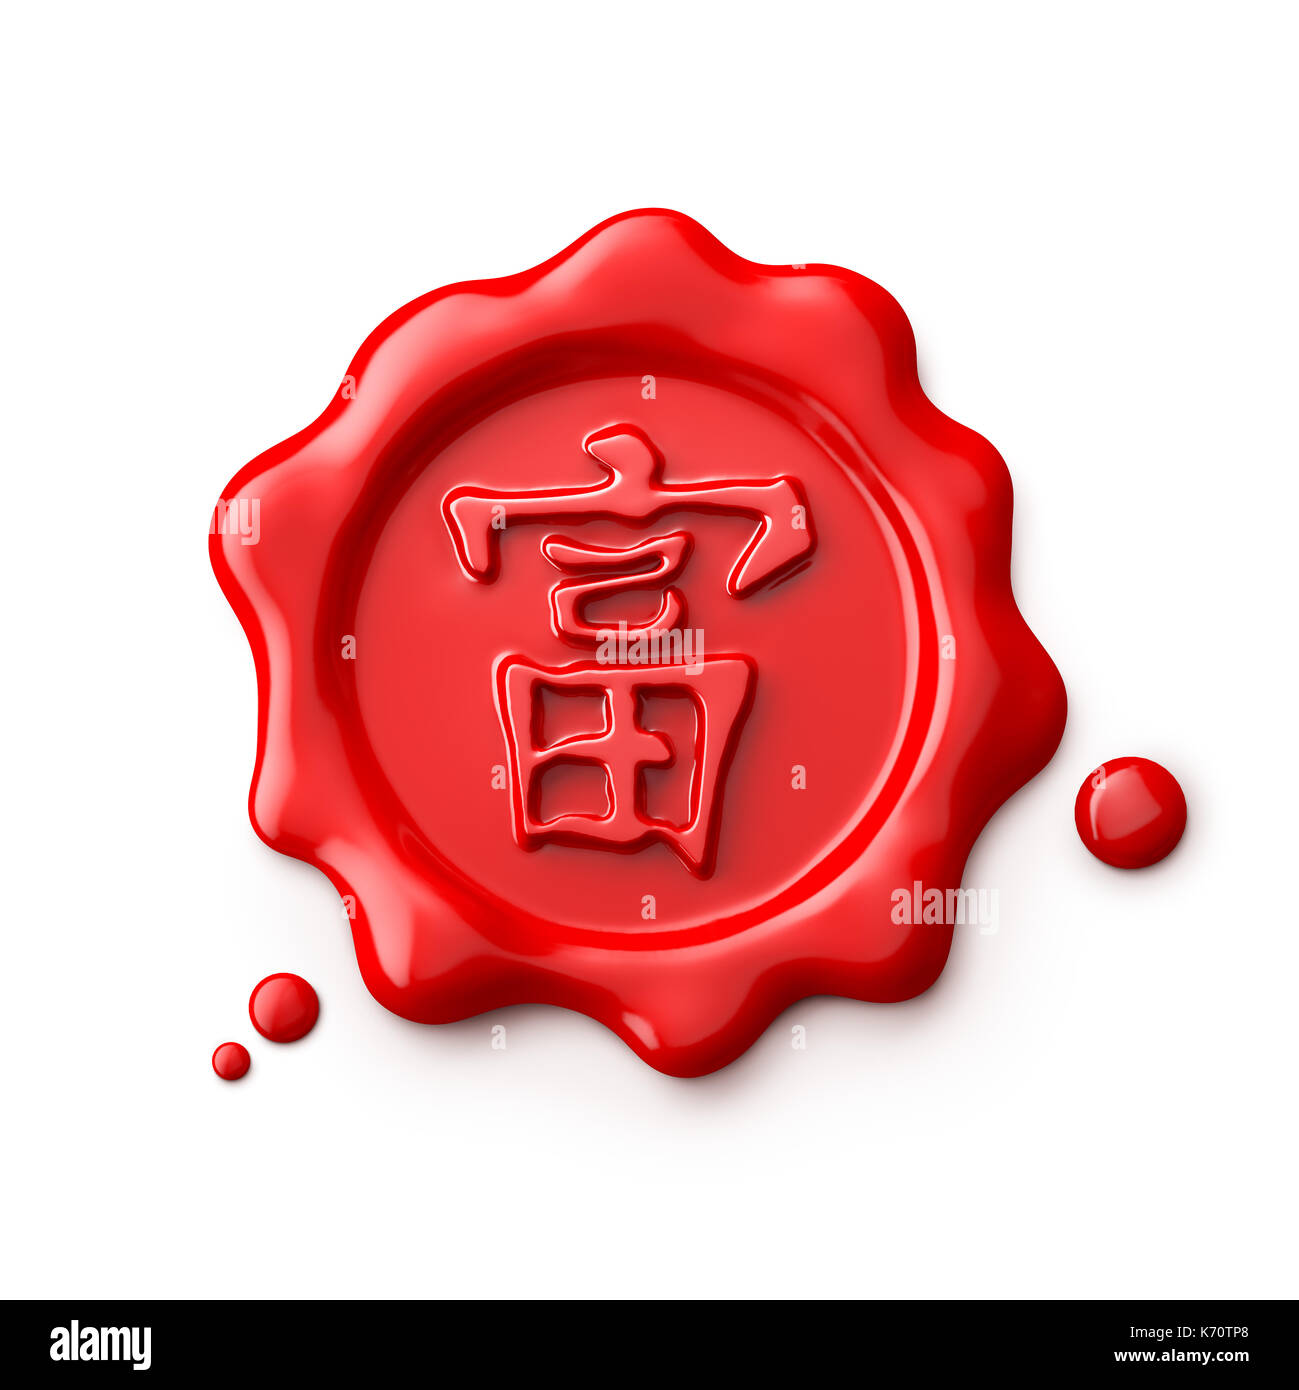 Wax seal isolated on white background, Chinese calligraphy 'FU' (Foreign text means Wealth) Stock Photo